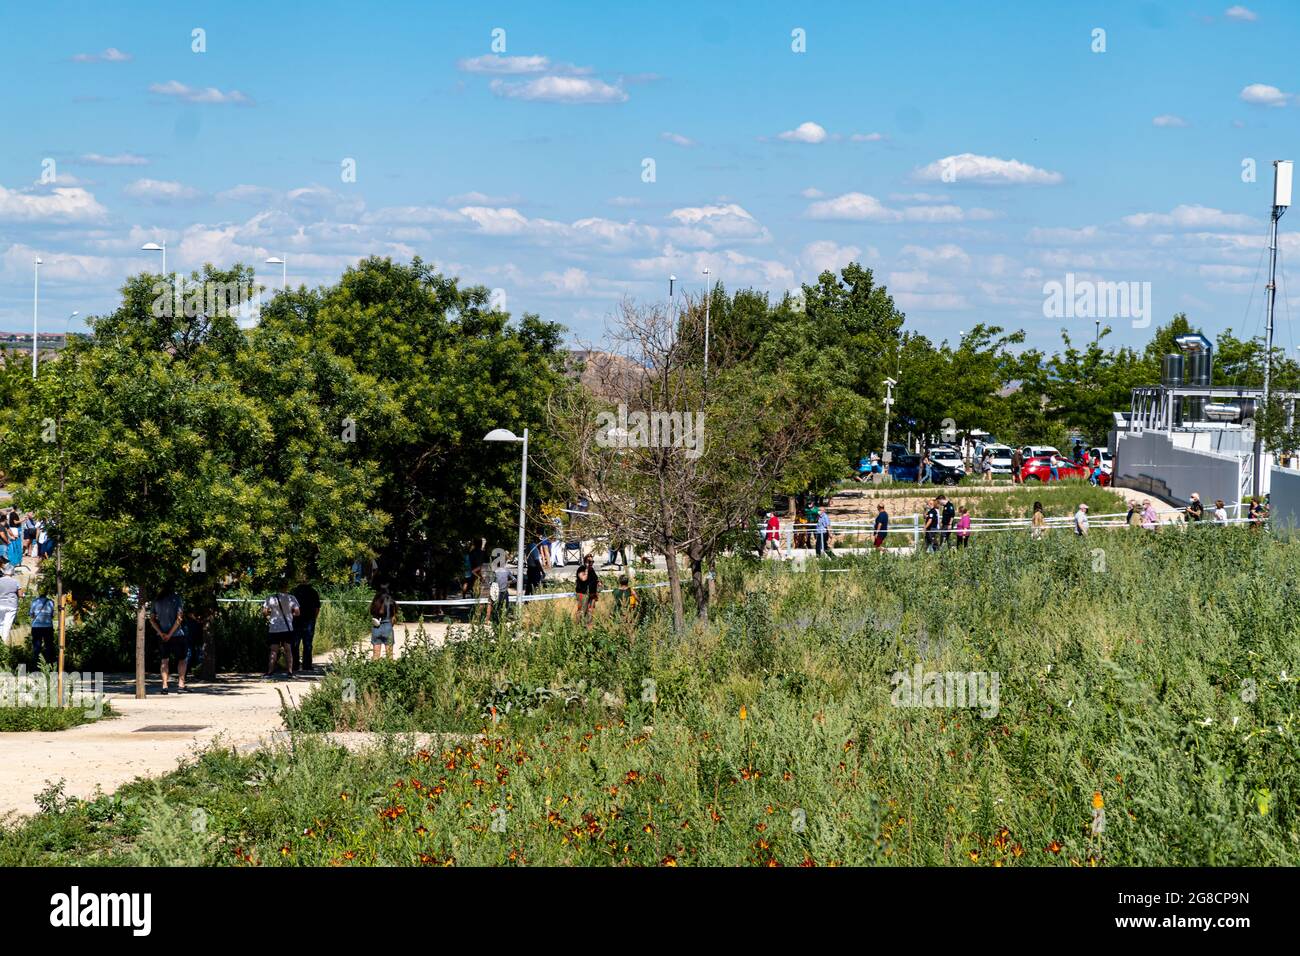 MADRID, SPAIN - Jul 07, 2021: The long lines to get vaccinated against Covid-19 outside the nurse Isabel Zendal of Valdebebas hospital Stock Photo